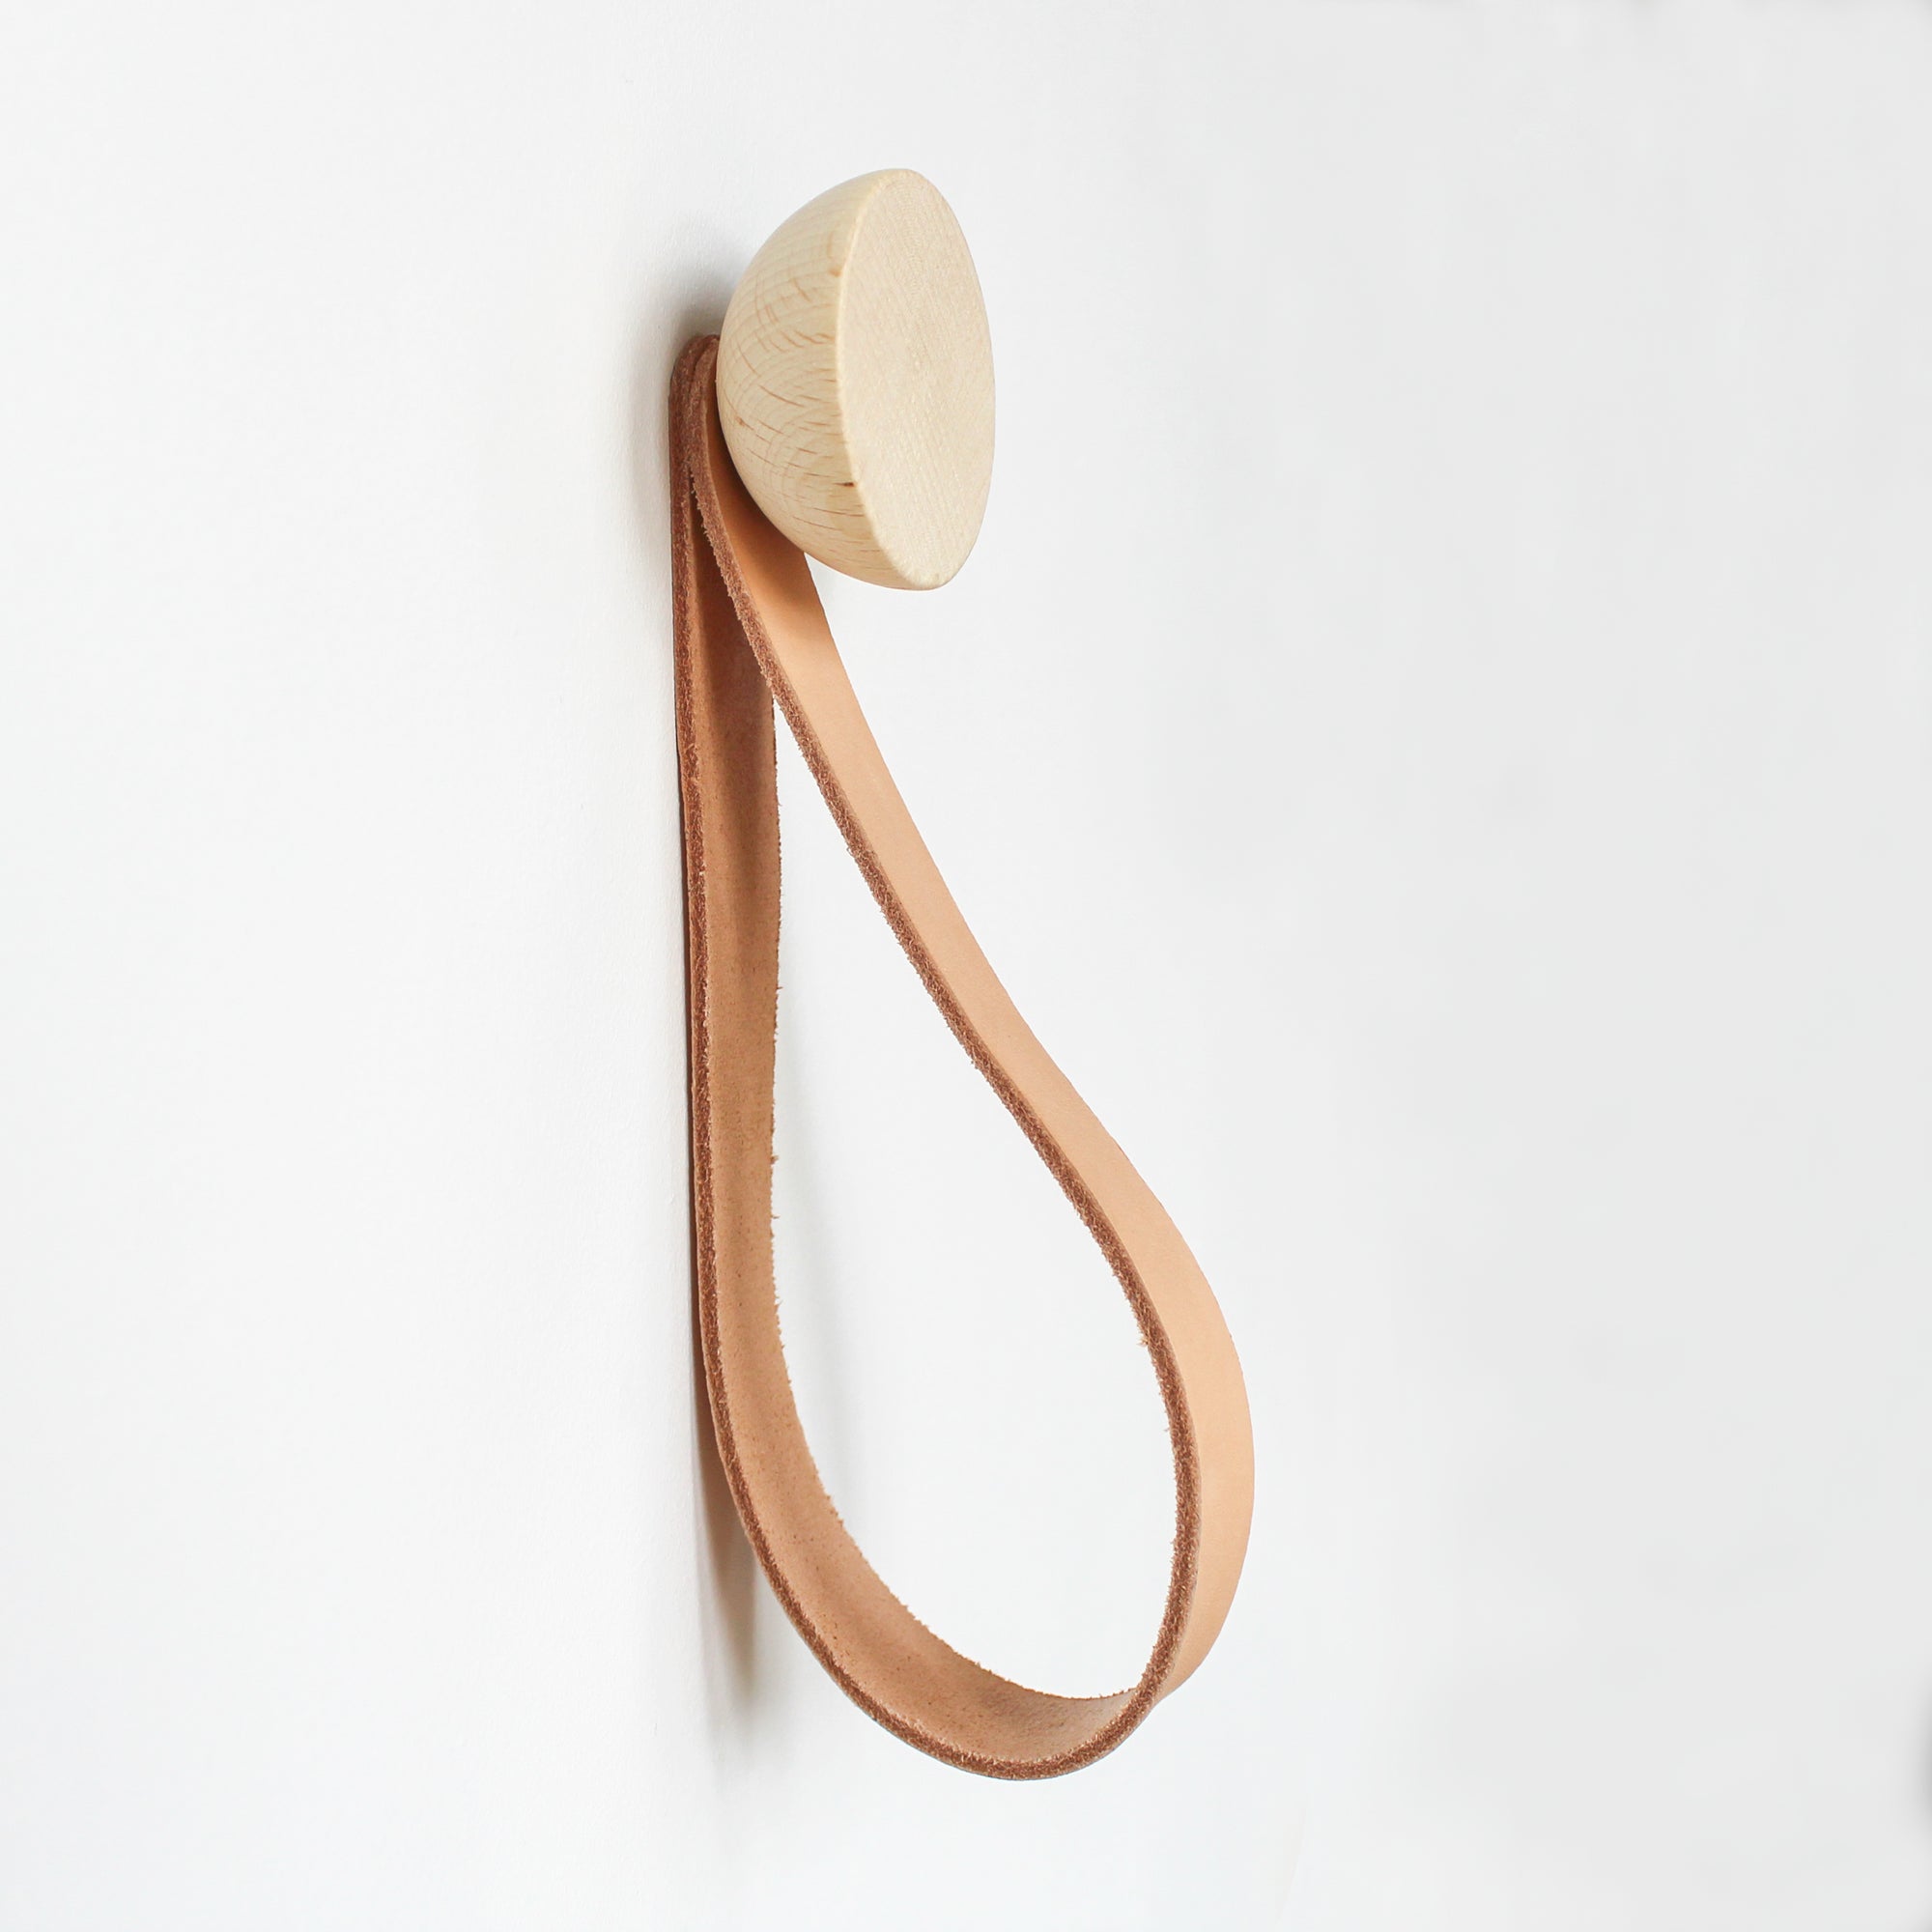 Large Beech Wood Wall Mounted Coat Hook With Leather Strap